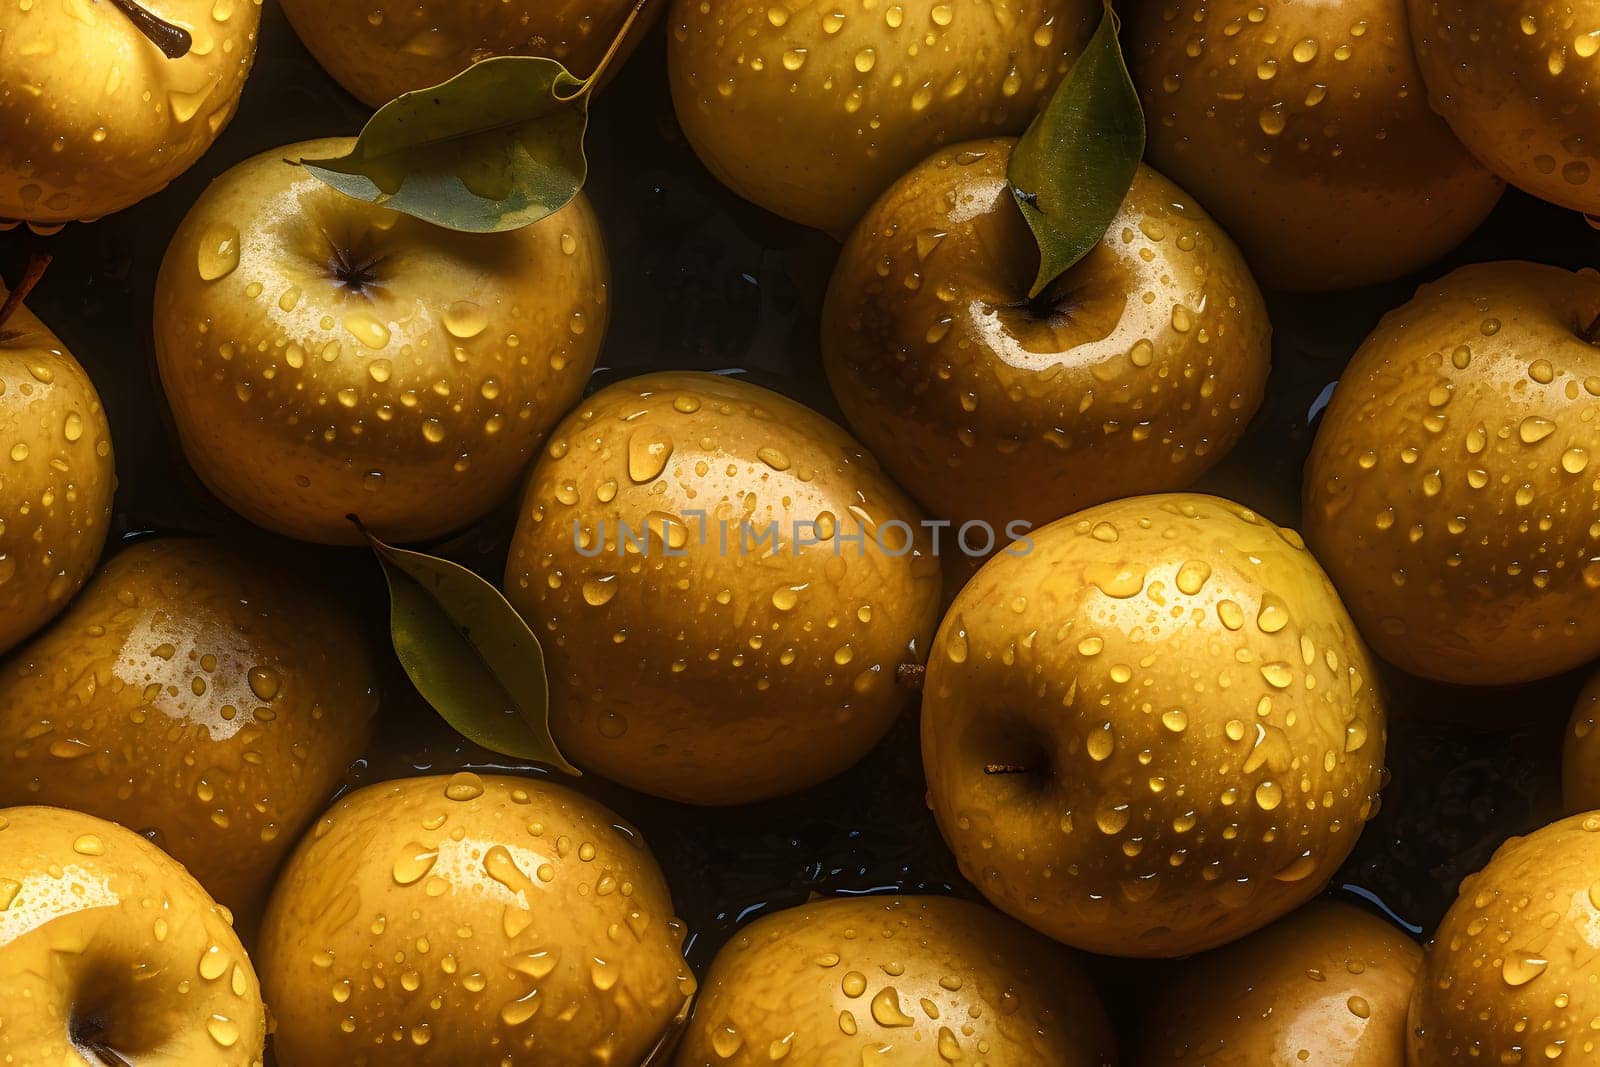 Fresh golden apples with water drops seamless closeup background and texture, neural network generated image by z1b